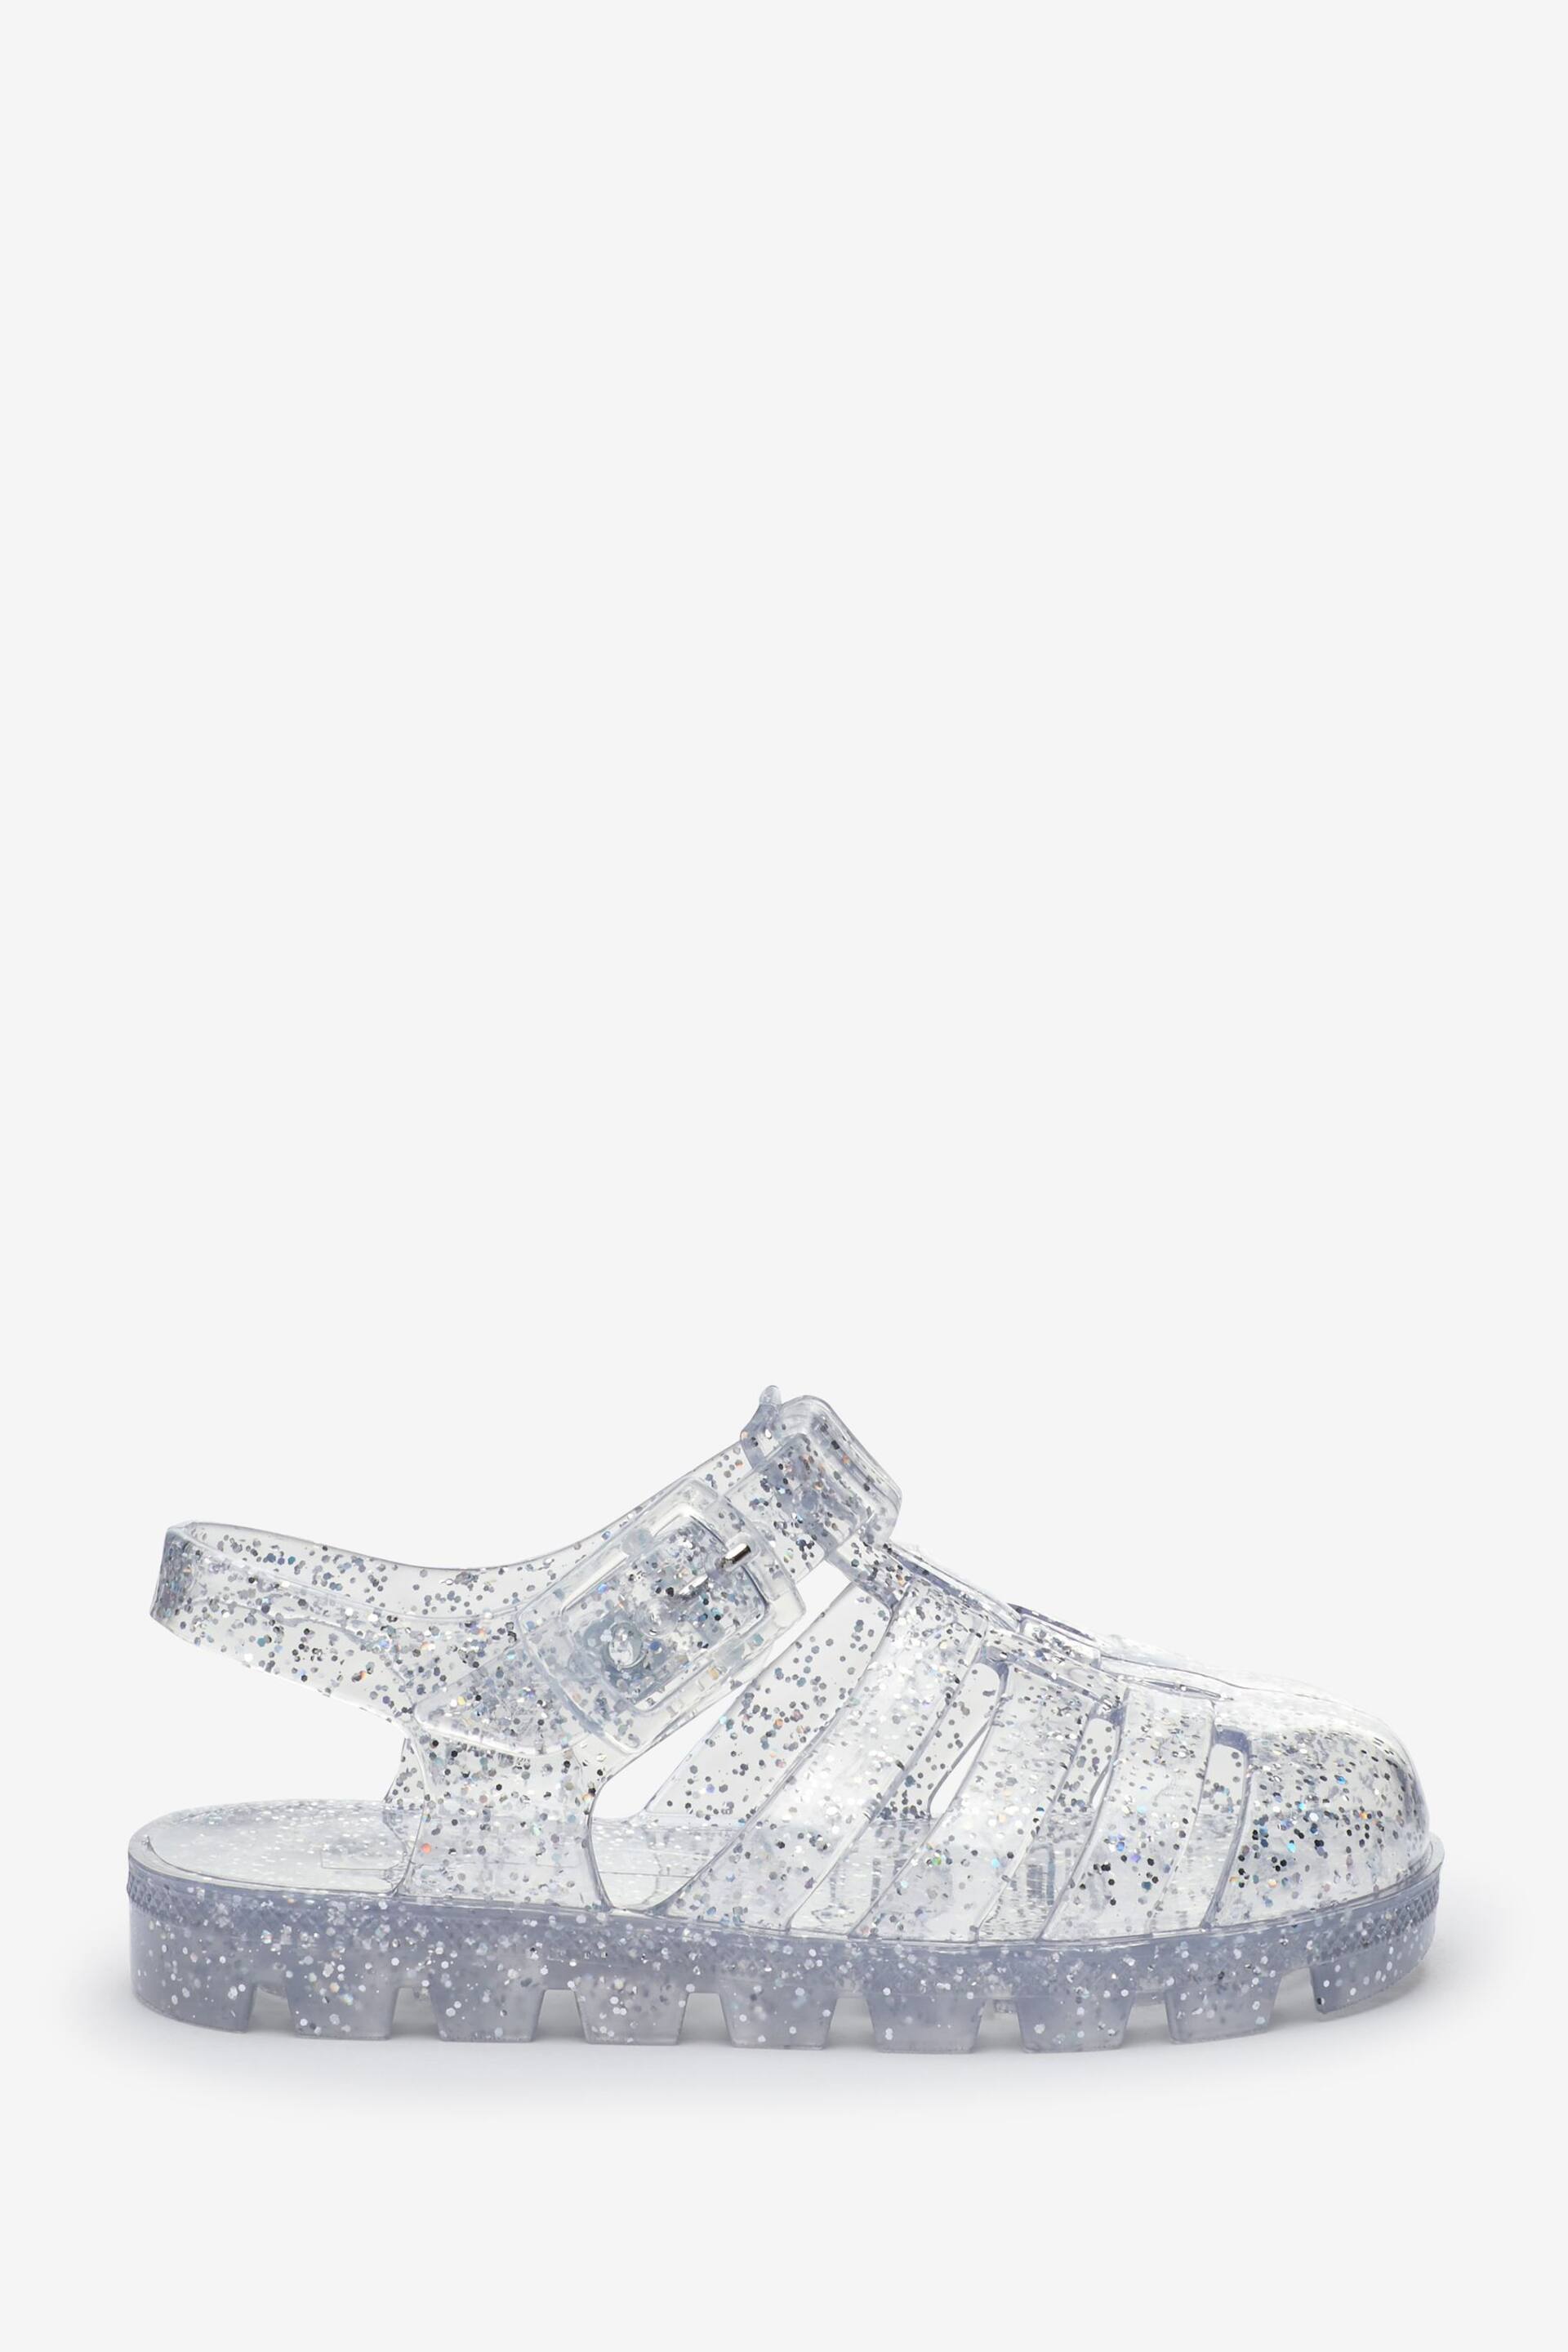 Silver Glitter Jelly Sandals - Image 1 of 4